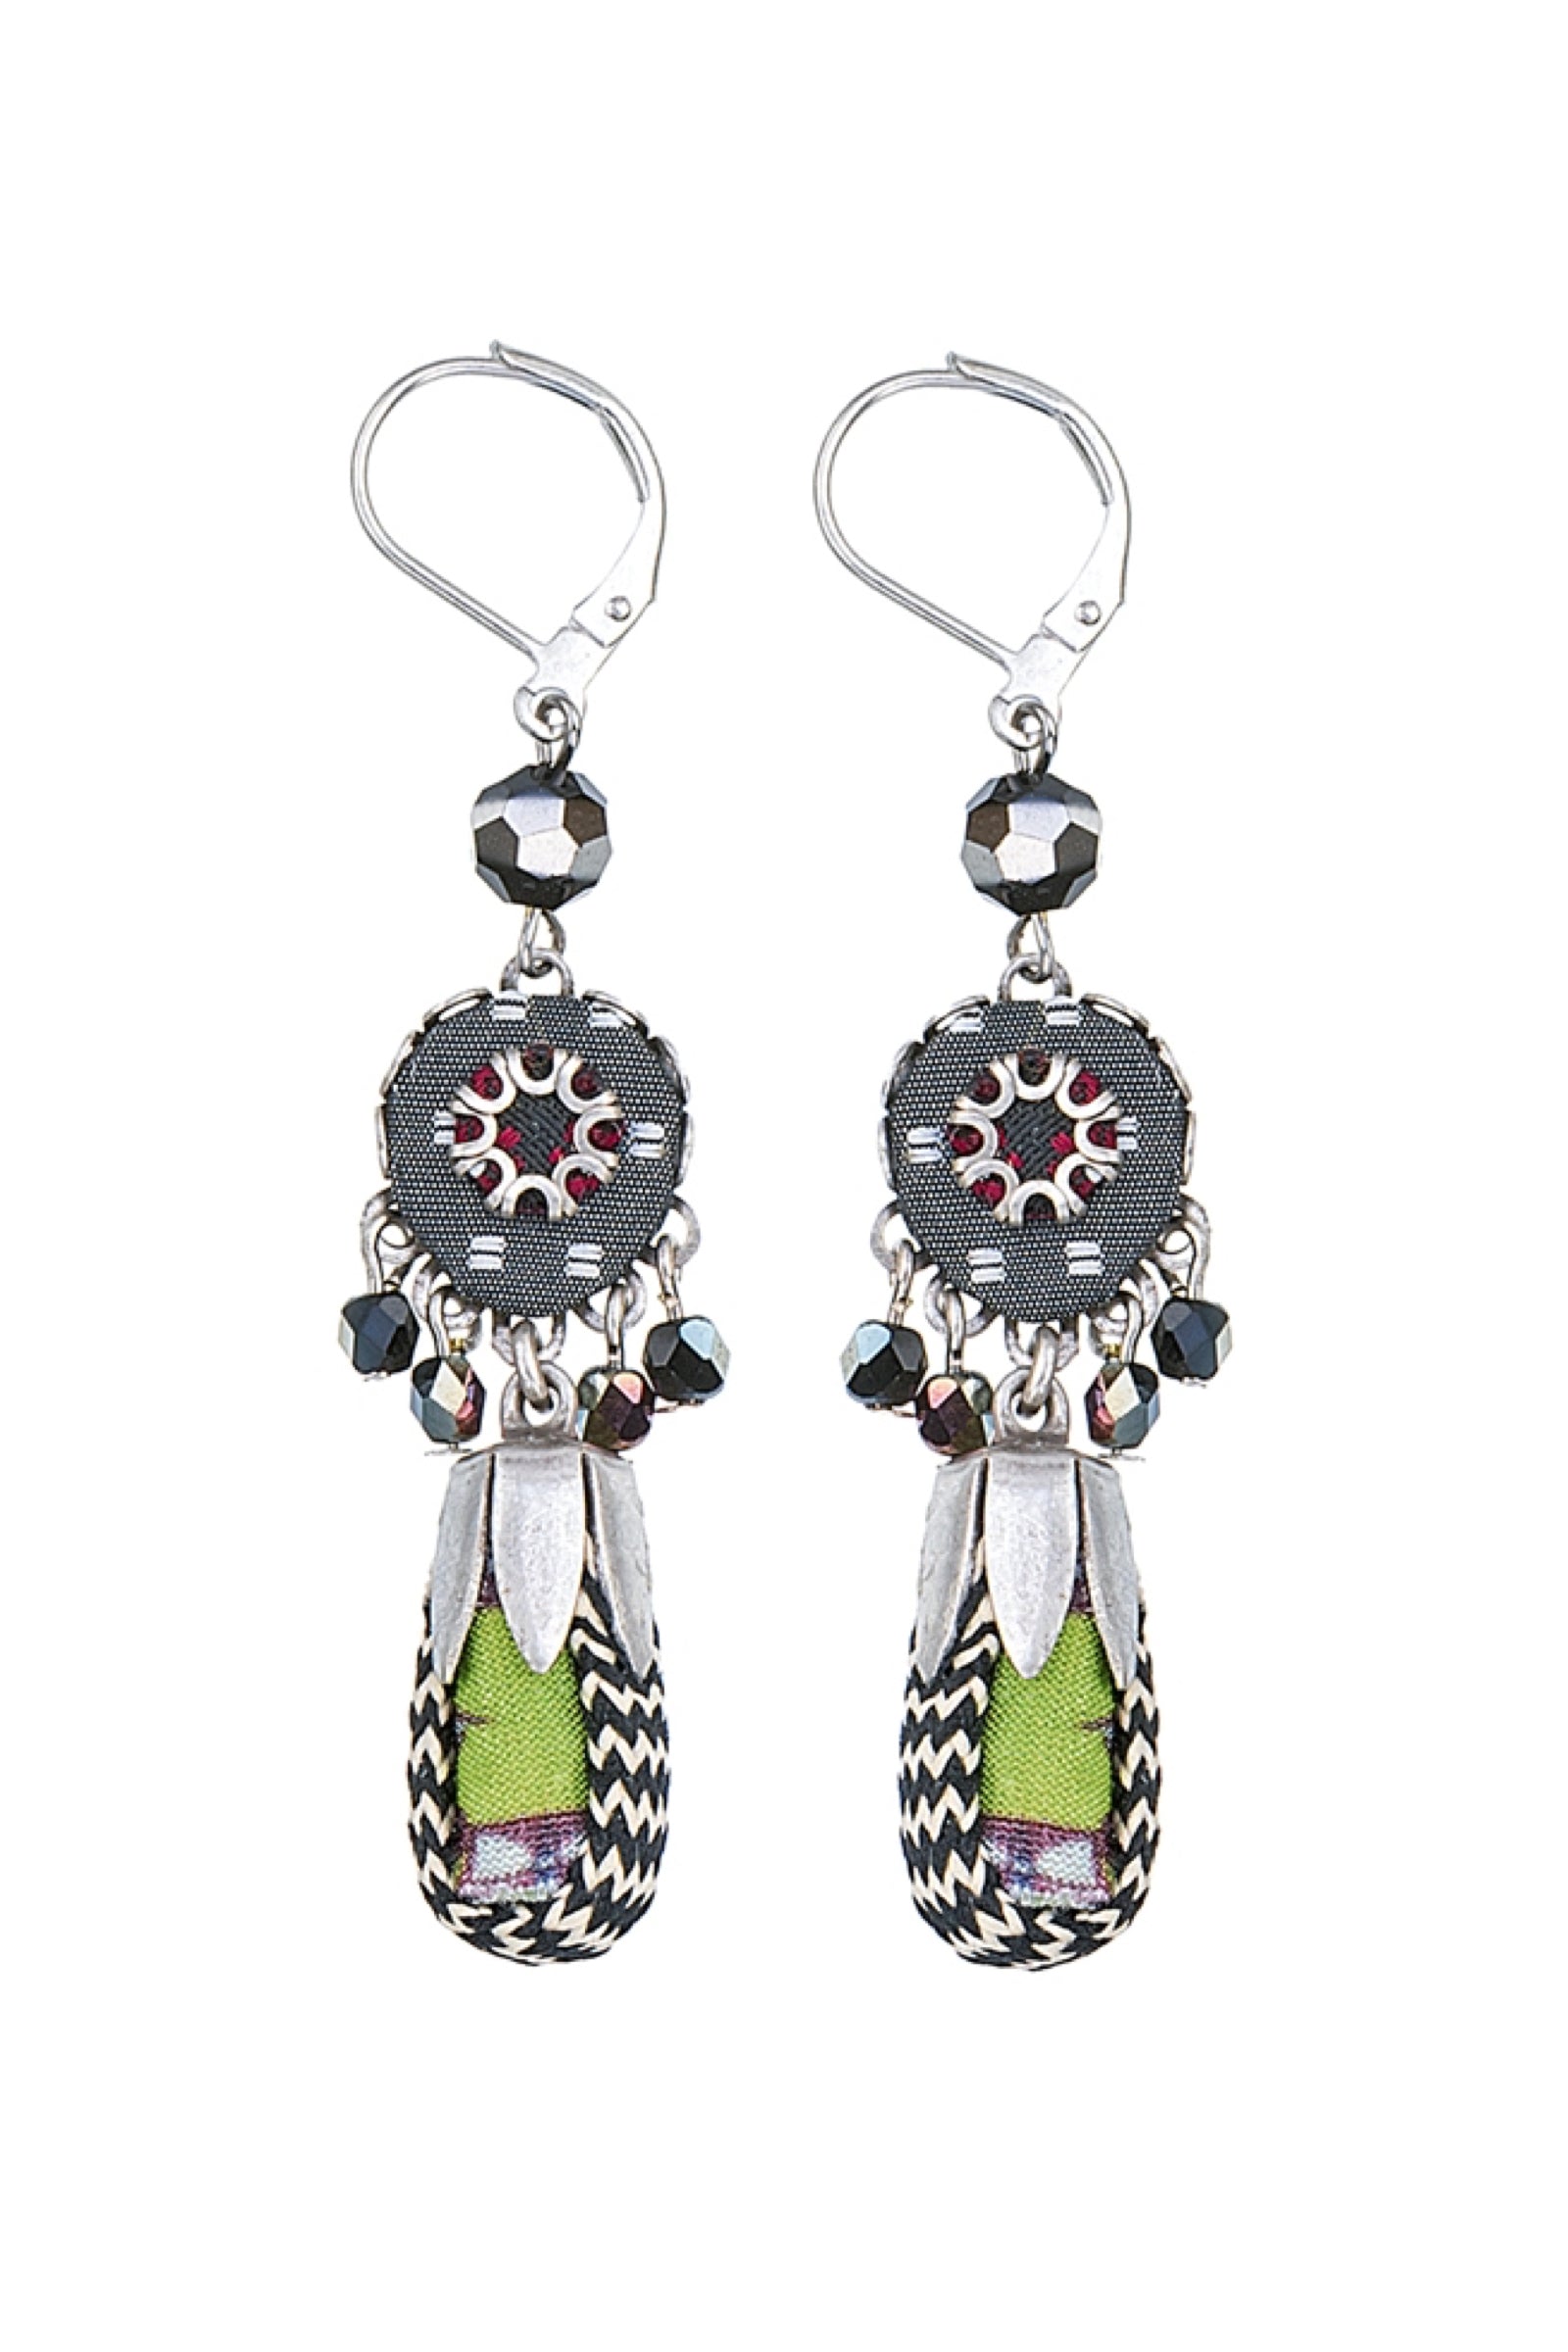 Details more than 128 most beautiful earrings